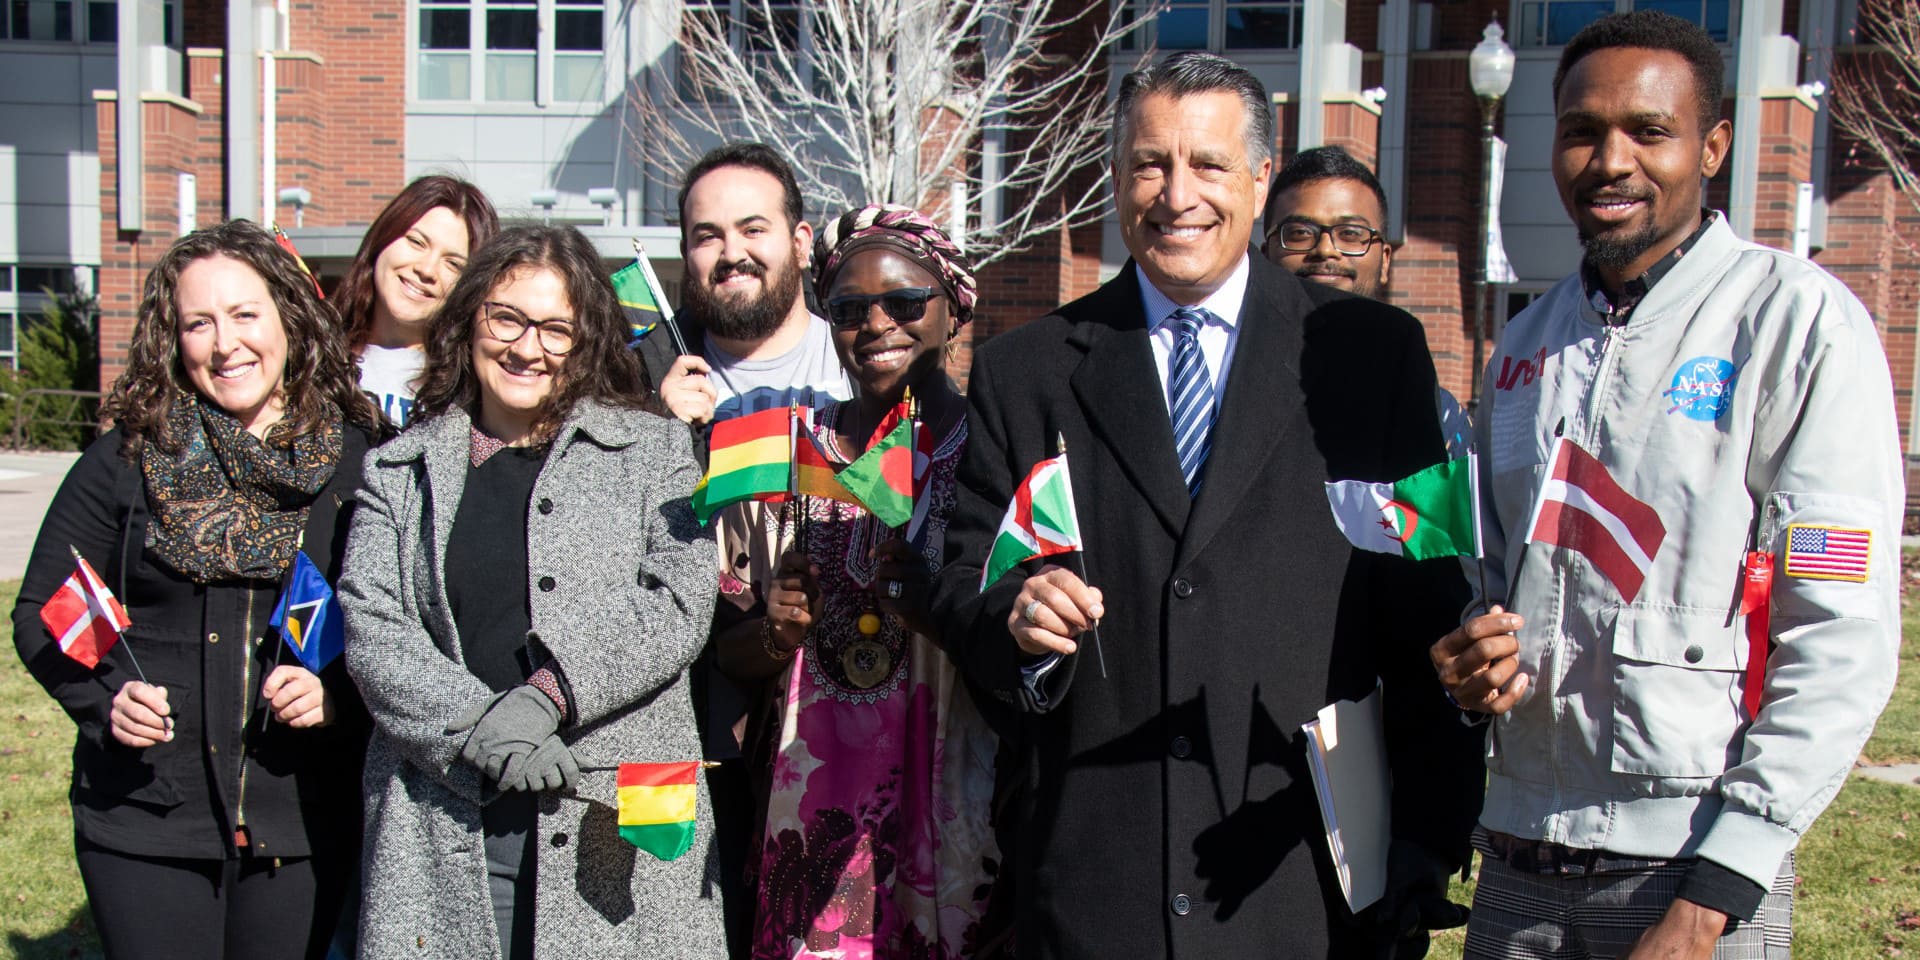 President Sandoval with students holding small flags from many countries.